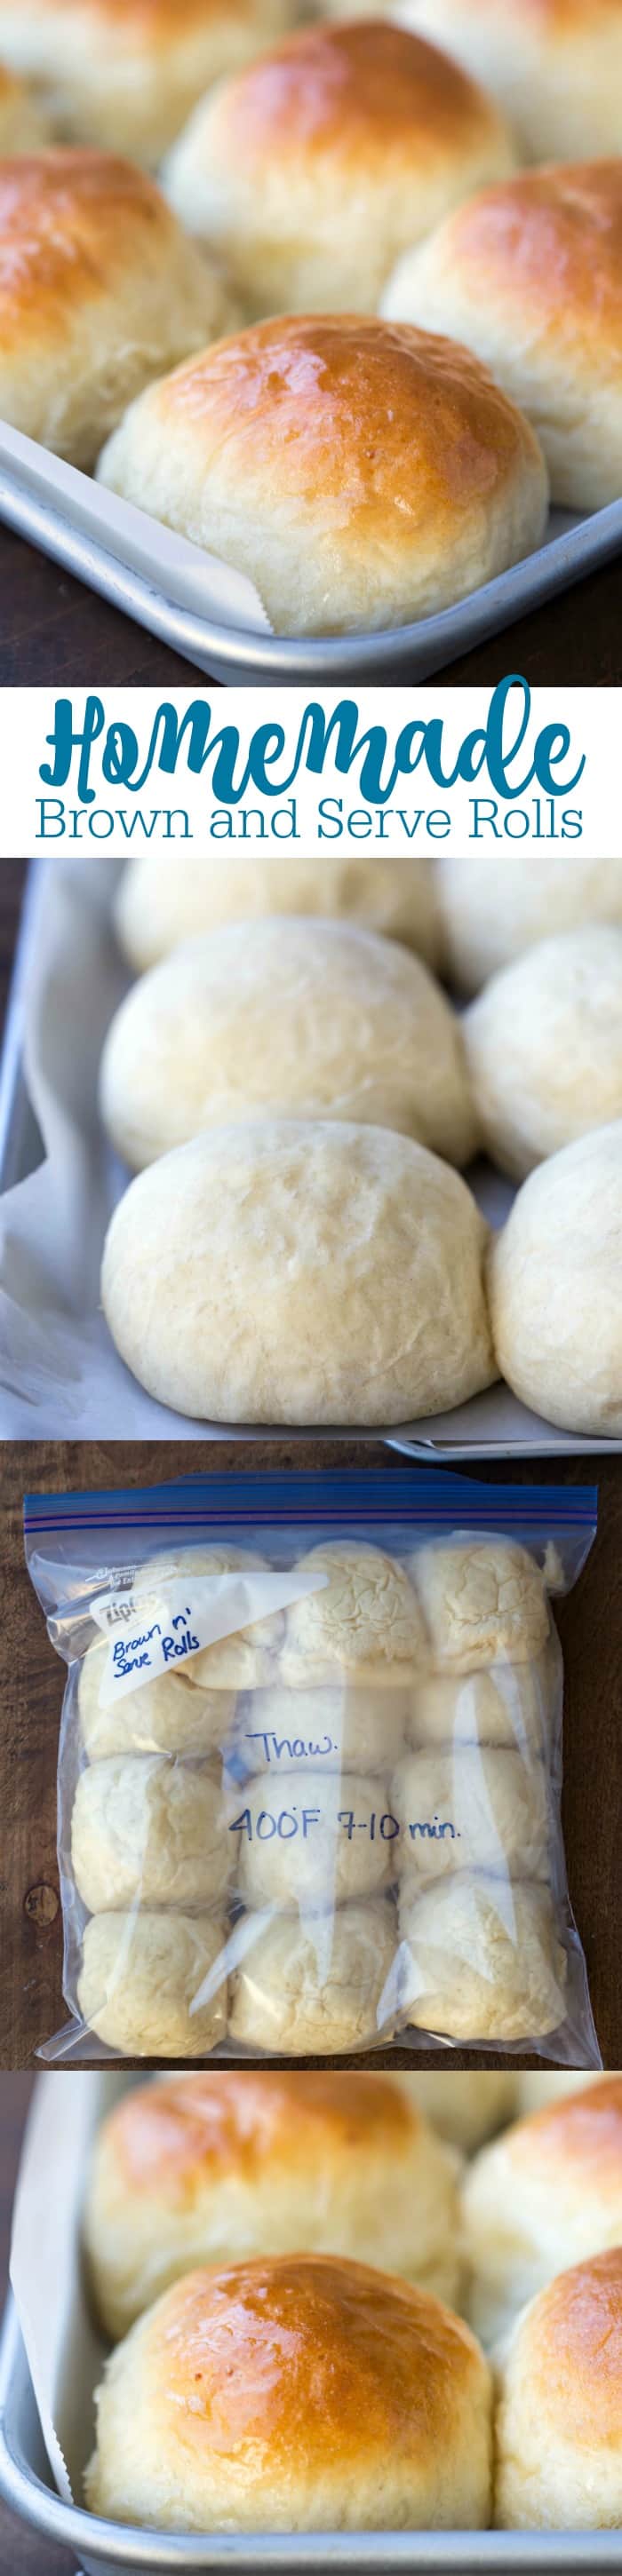 Homemade Brown and Serve Rolls